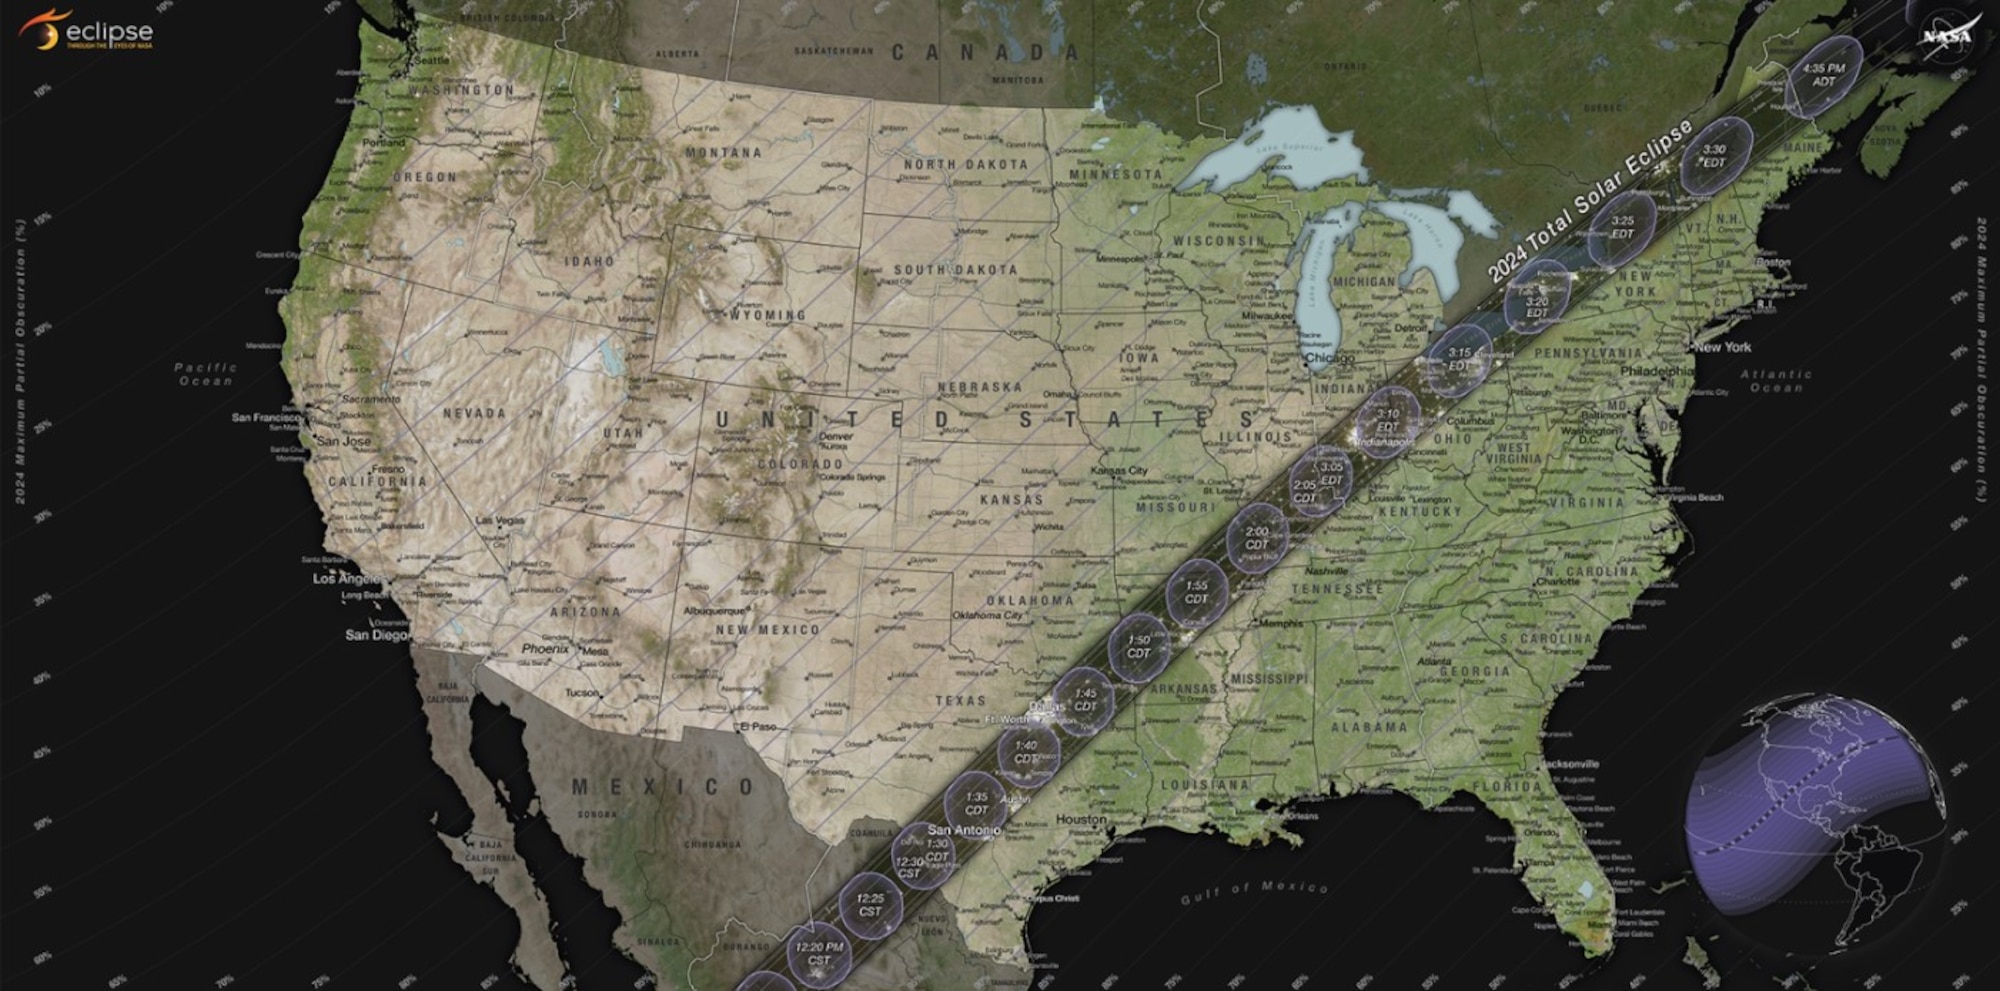 This graphic shows the path of totality for the April 8, 2024, solar eclipse. An estimated 32 million people reside along this path, with millions more expected to pour into the area to view the apocalyptic event. This is sure to cause severe traffic congestion and increased road hazards to drivers and their occupants, as well as pedestrians. The congestion can also lead to a high number of cell phones in any single geographic area, which can overwhelm cellular infrastructure and disrupt communication.